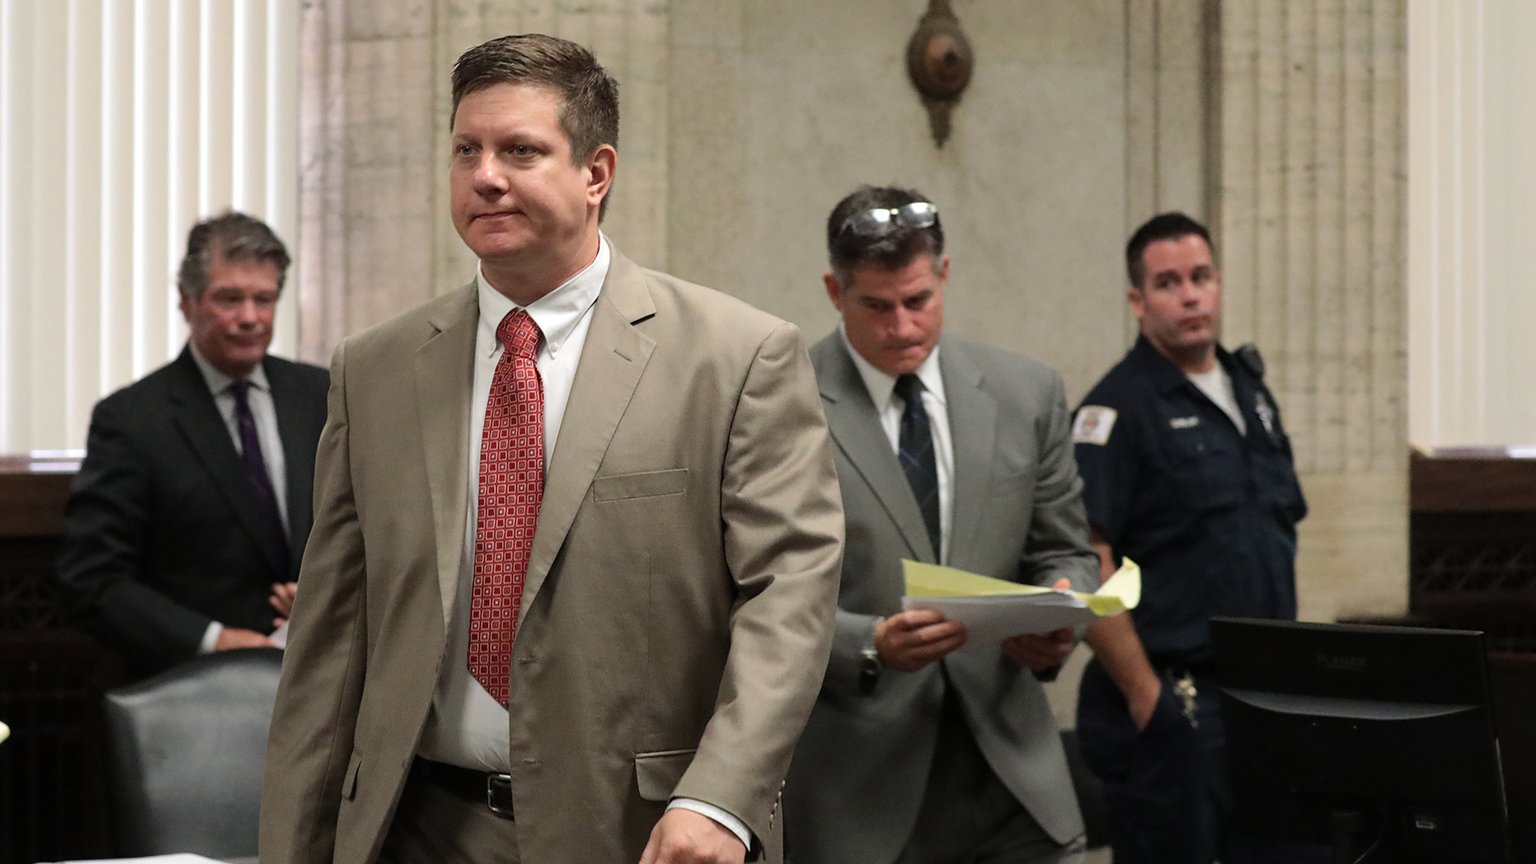 Chicago police Officer Jason Van Dyke walks over to the judge's bench at the start of the hearing on the shooting death of Laquan McDonald, at the Leighton Criminal Court Building Monday, Aug. 20, 2018. (Antonio Perez / Chicago Tribune / Pool)